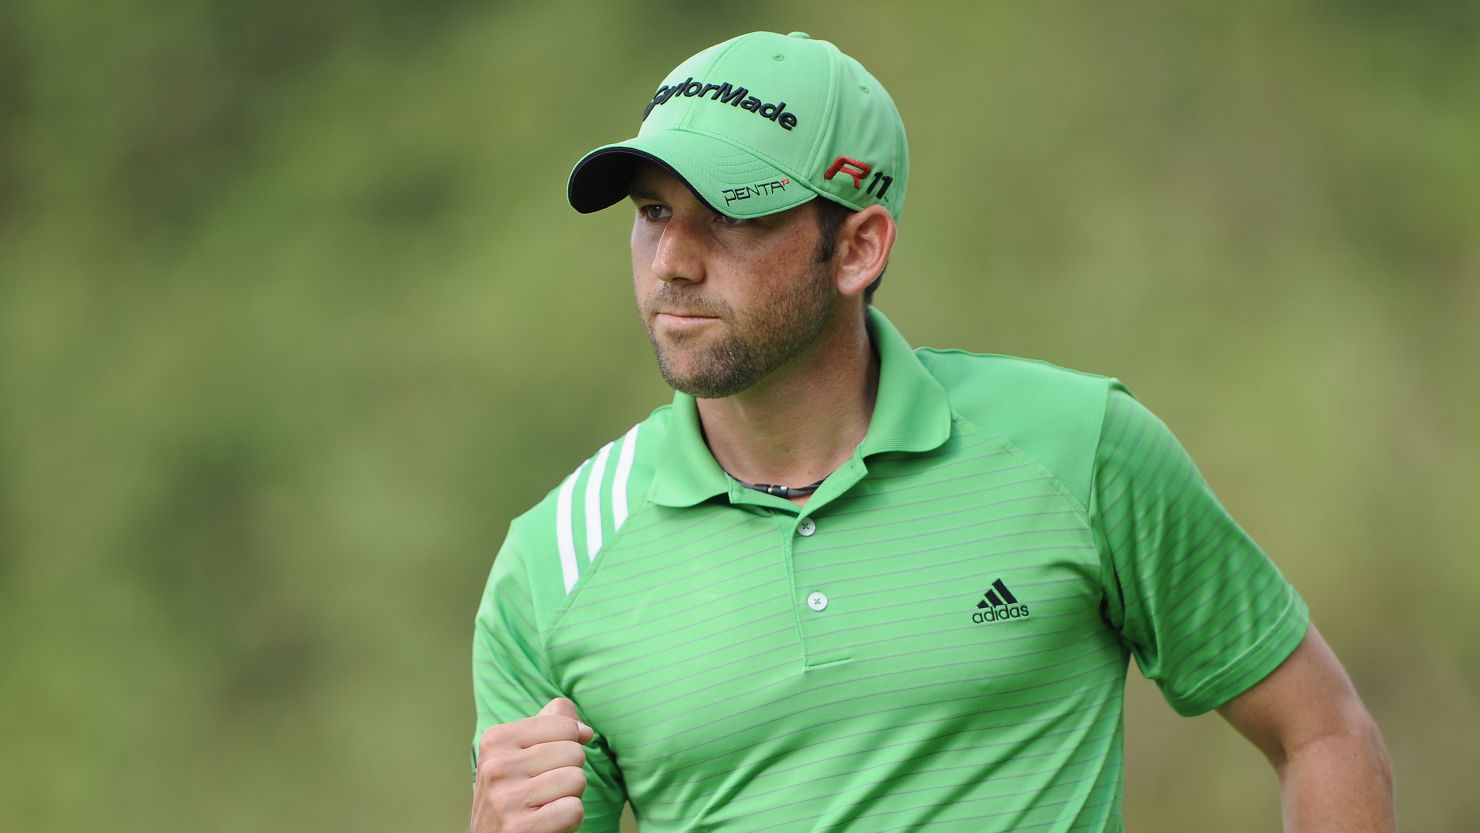 Sergio Garcia punches the air after picking up an eagle in his third round at the Castello Masters